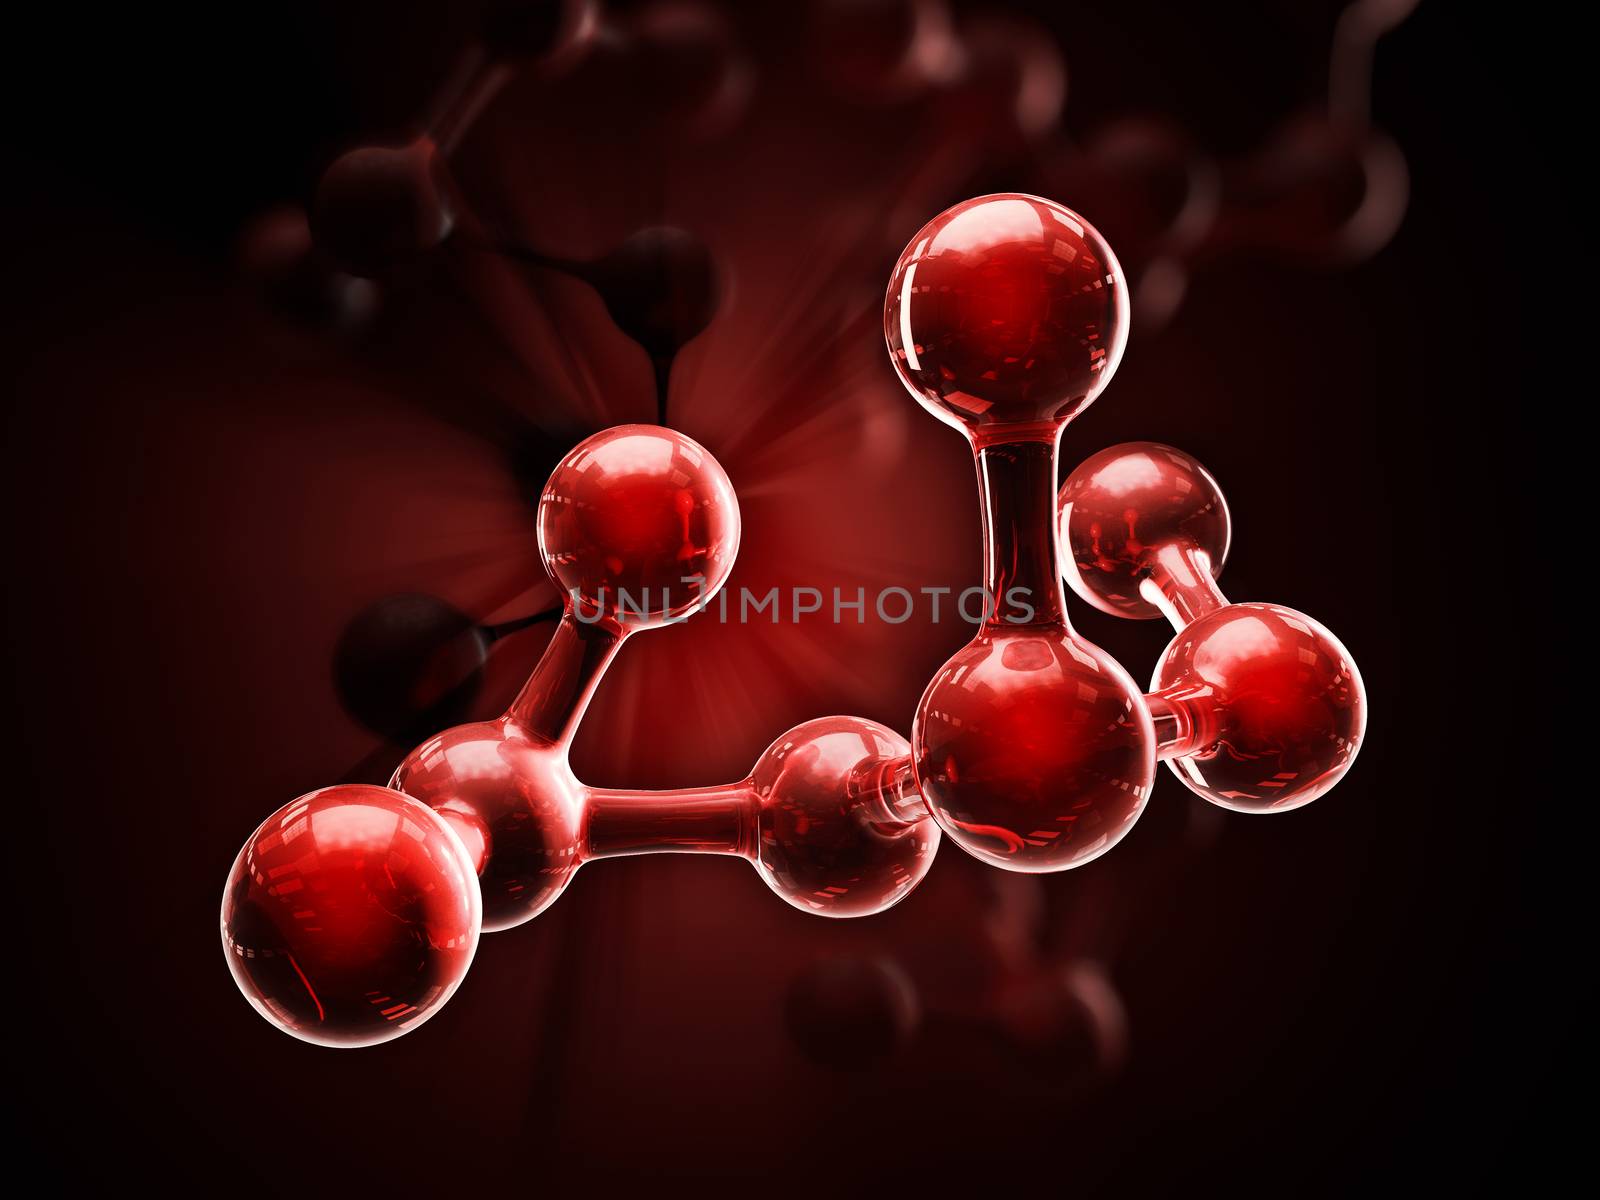 3d illustration of molecule model. Science or medical background with molecules